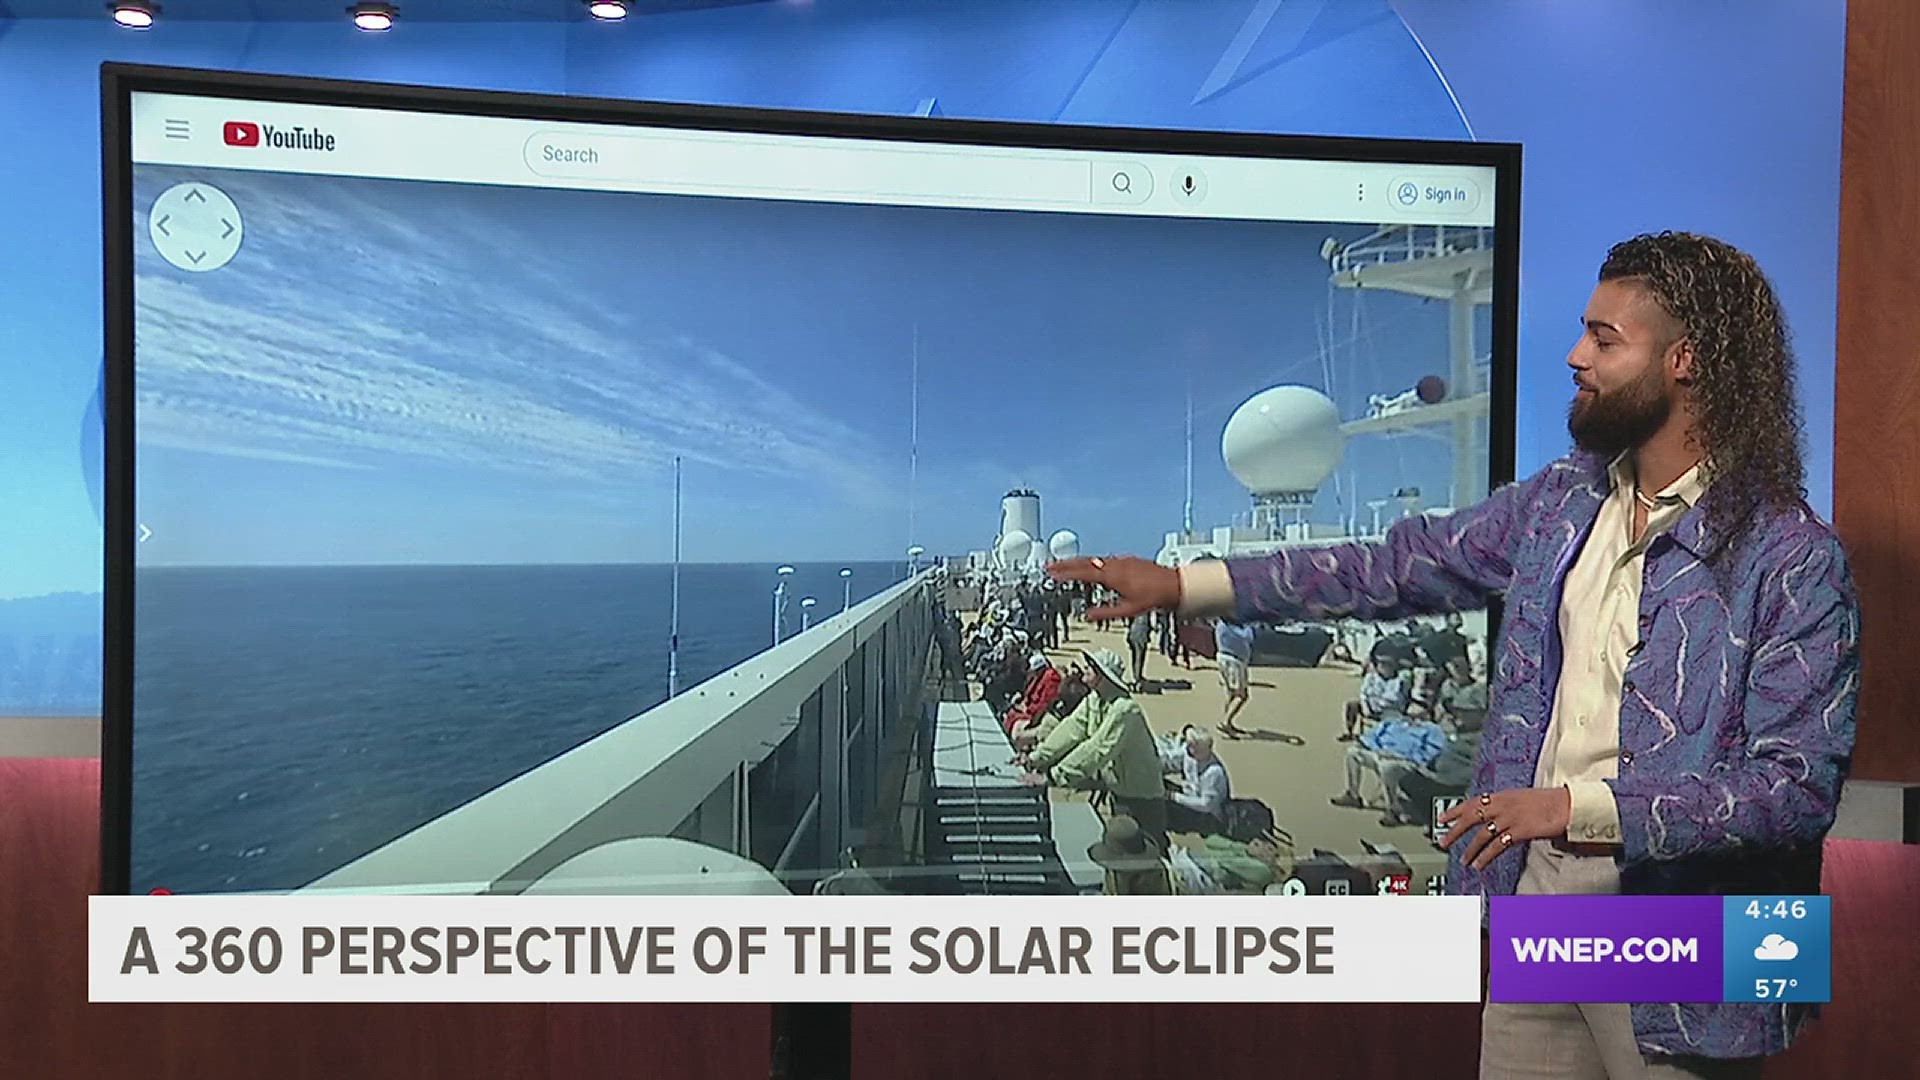 Meteorologist Jeremy Lewan shot a panoramic video from onboard an eclipse cruise. With this perspective, it feels like you're right onboard watching with him!